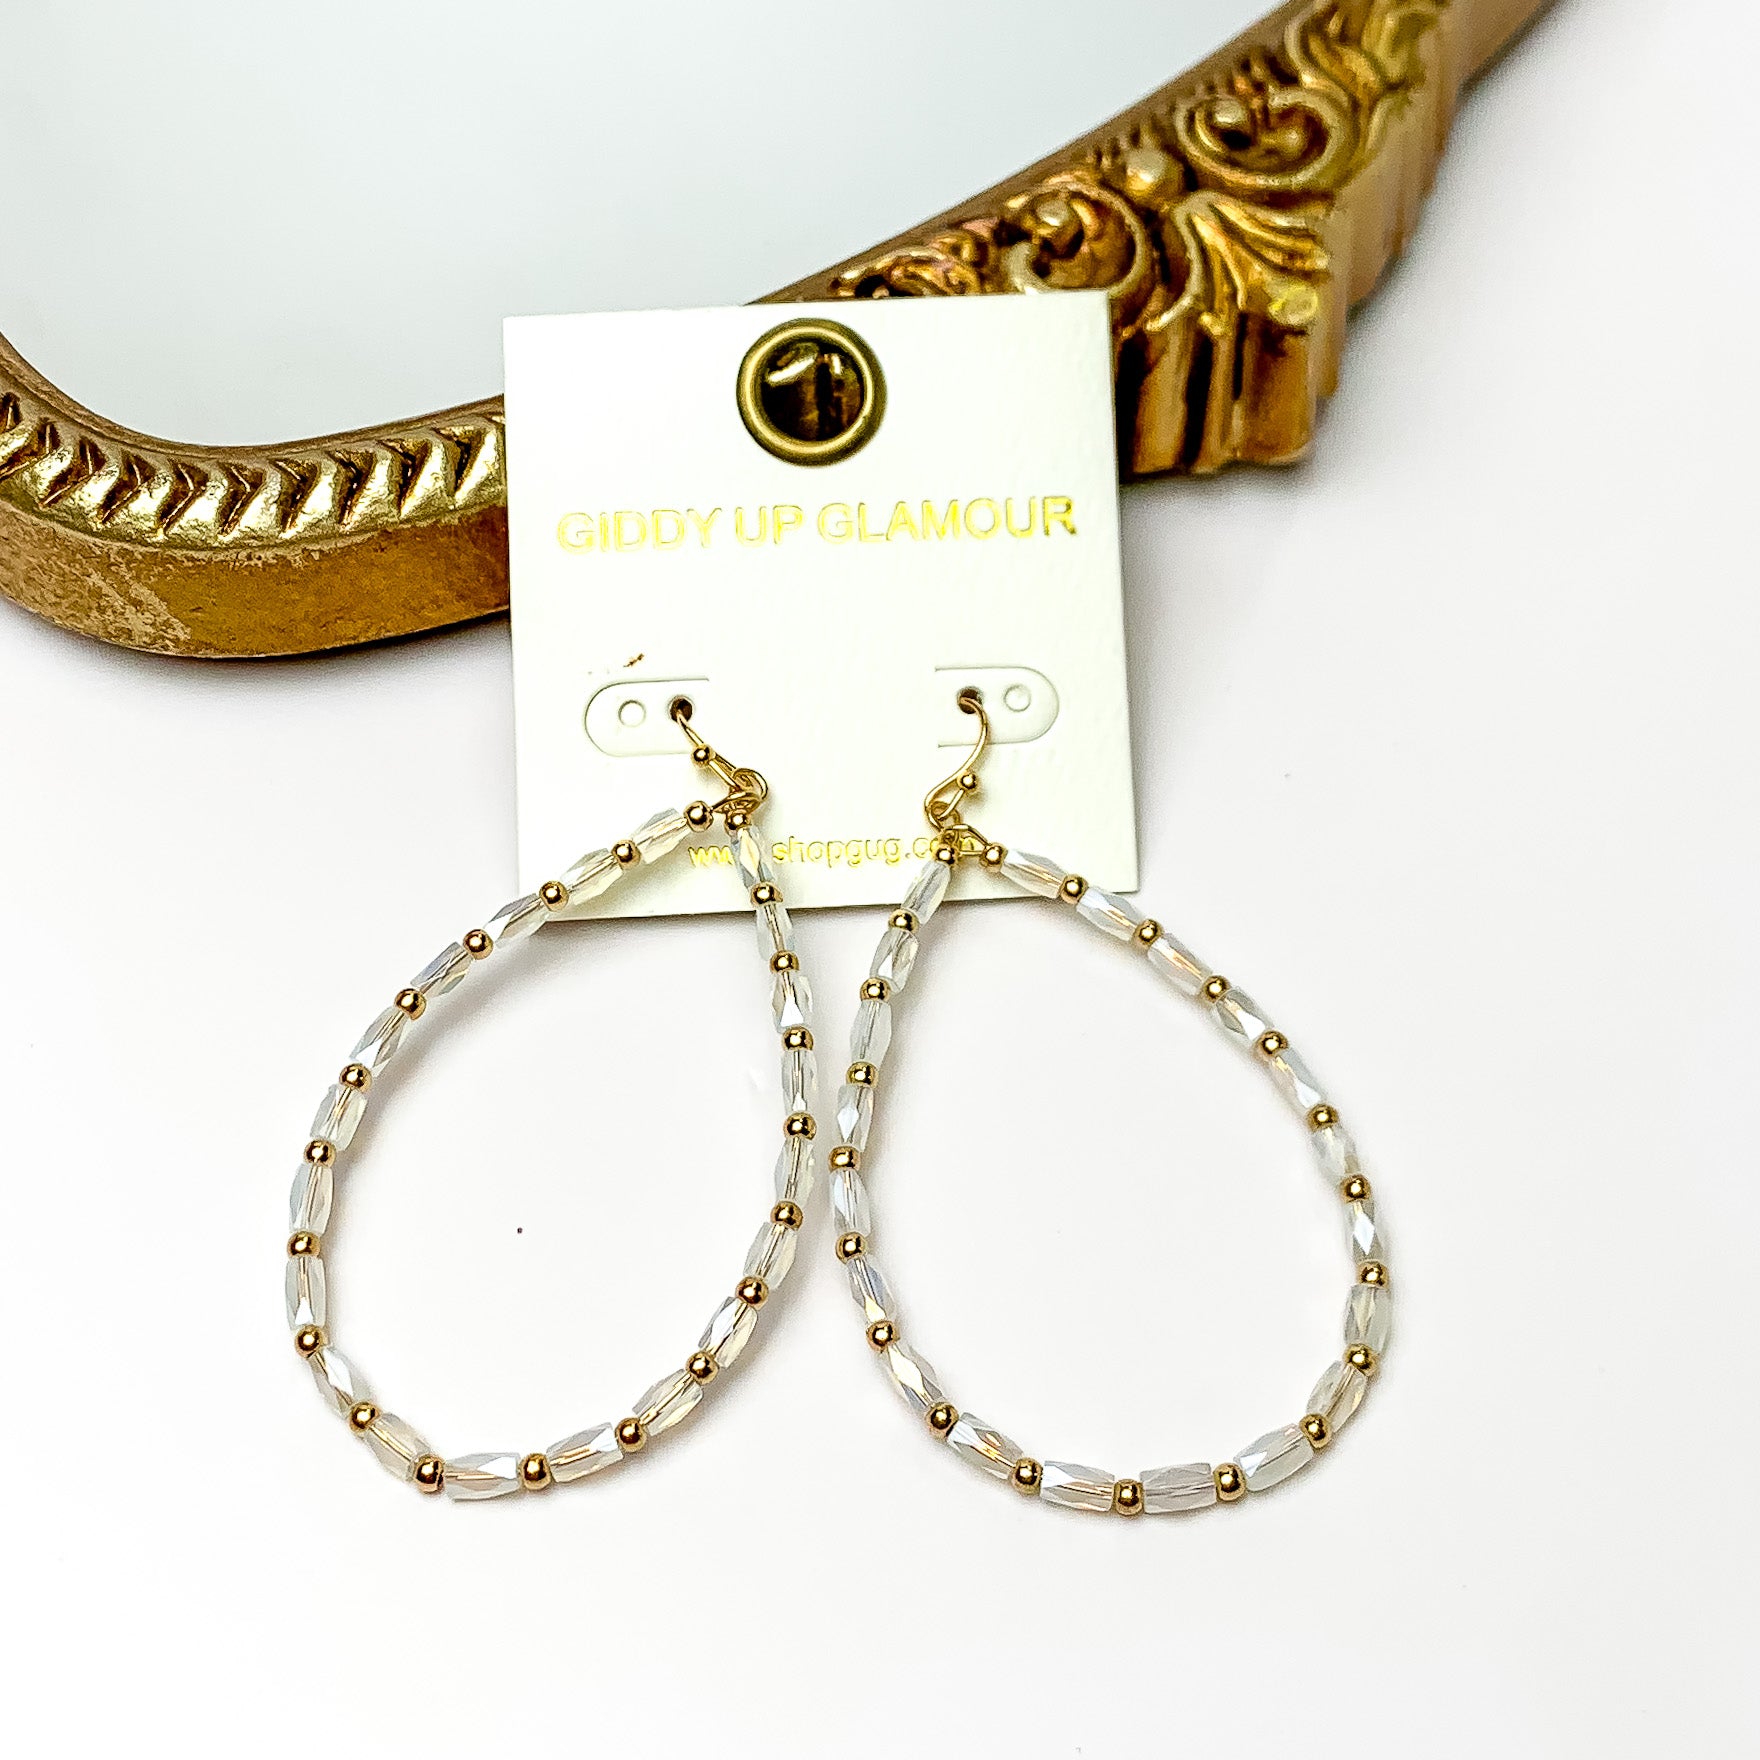 AB Beaded open drop earrings with gold tone features. Pictured on a white background with a gold frame through it.